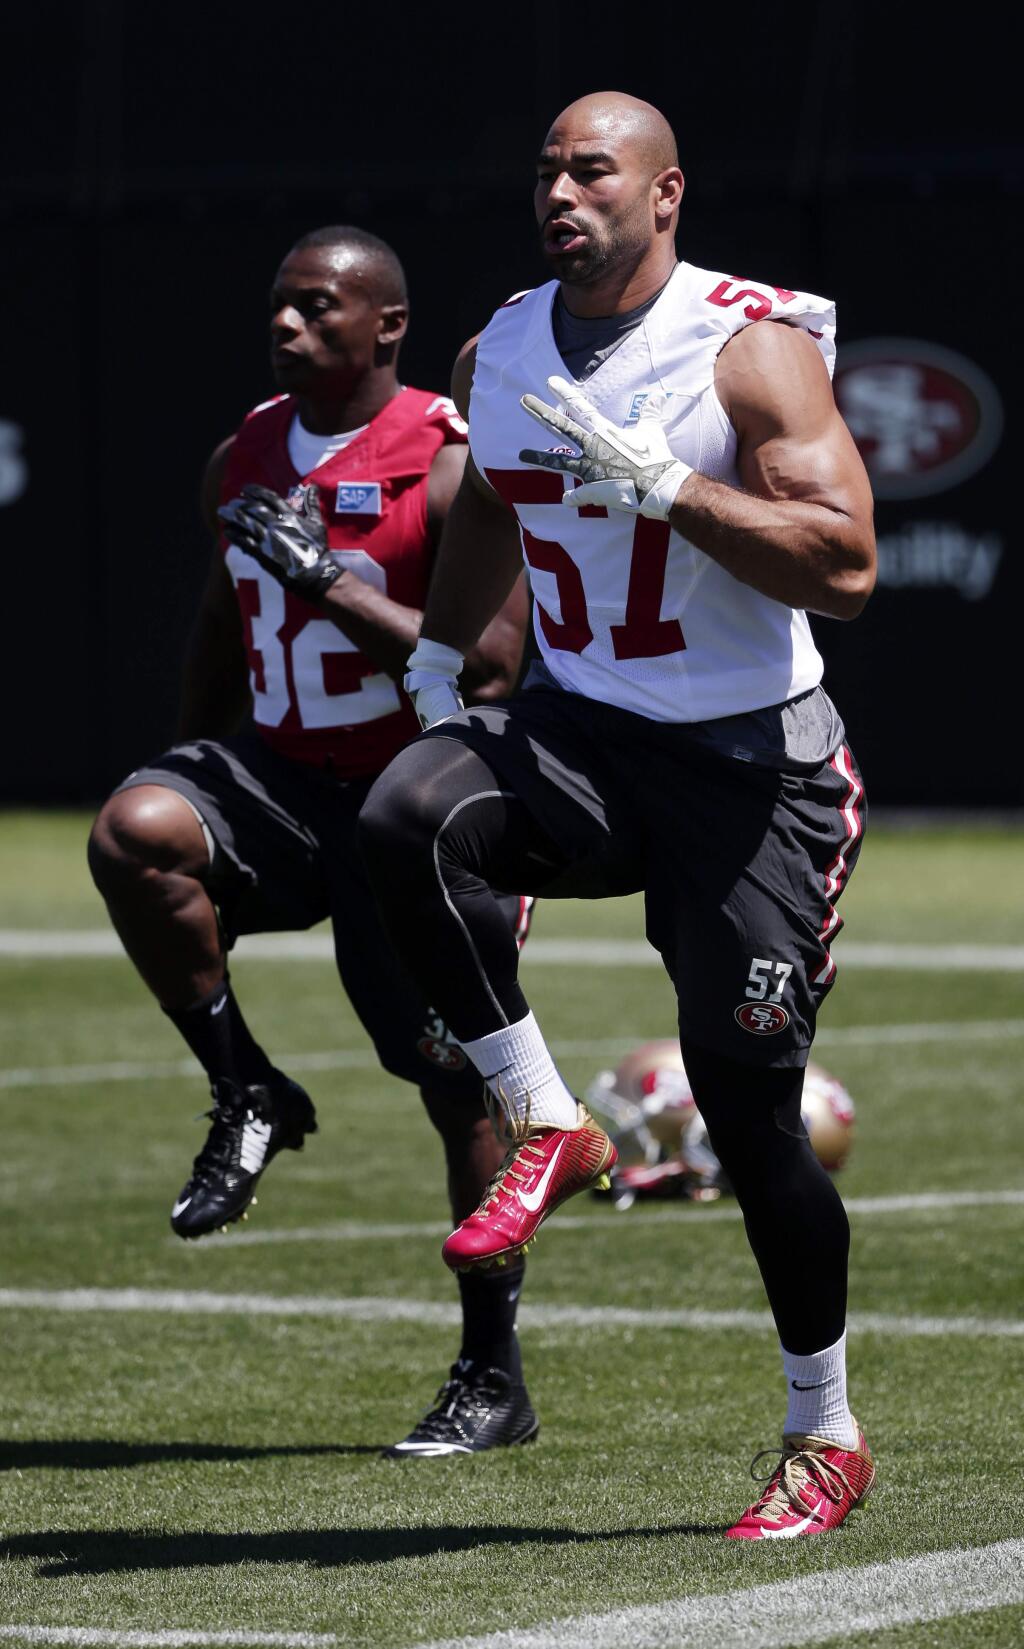 San Francisco 49ers linebacker Michael Wihoite (57) warms up next to teammate Kendall Hunter (32) during an NFL football training camp on Friday, July 25, 2014, in Santa Clara, Calif. (AP Photo)